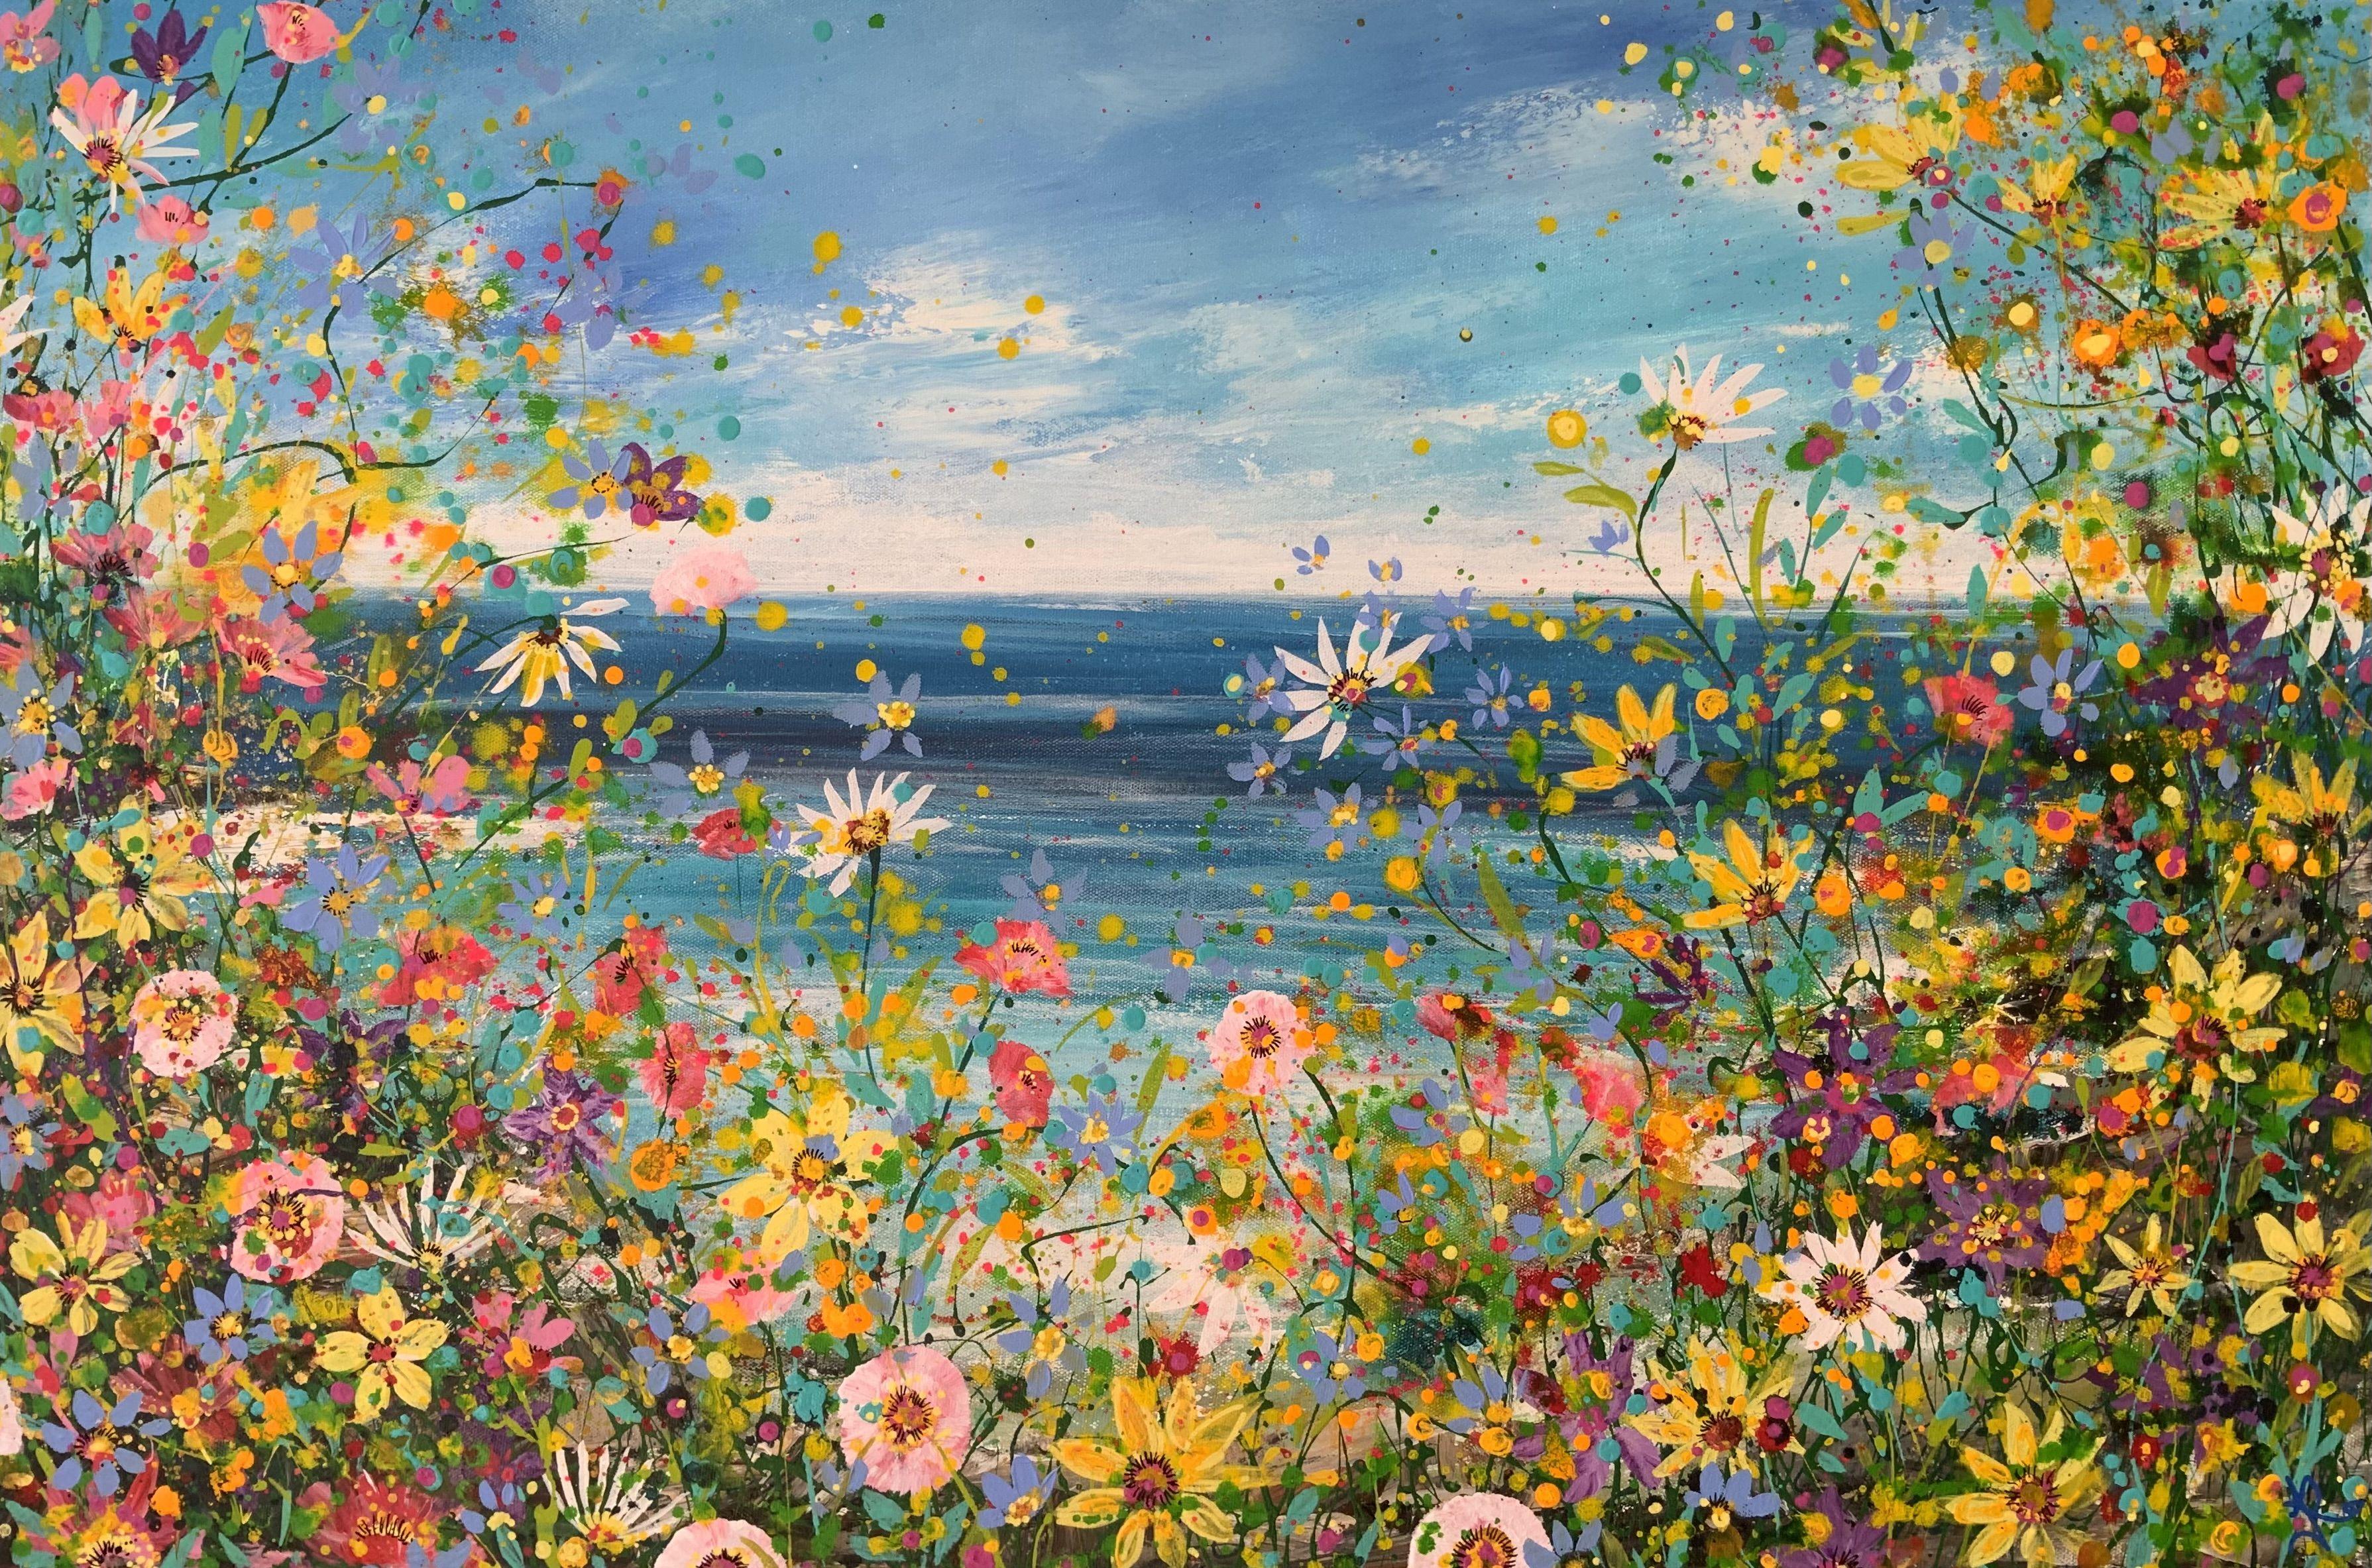 A huge blast of summer glory by the ocean. A frenzy of colour, semi abstract flowers dance merrily in the sea breeze. I was buzzing when I painted this from seeing Coldplay, I think the energy and passion speaks clearly.   Painted onto Loxley gold